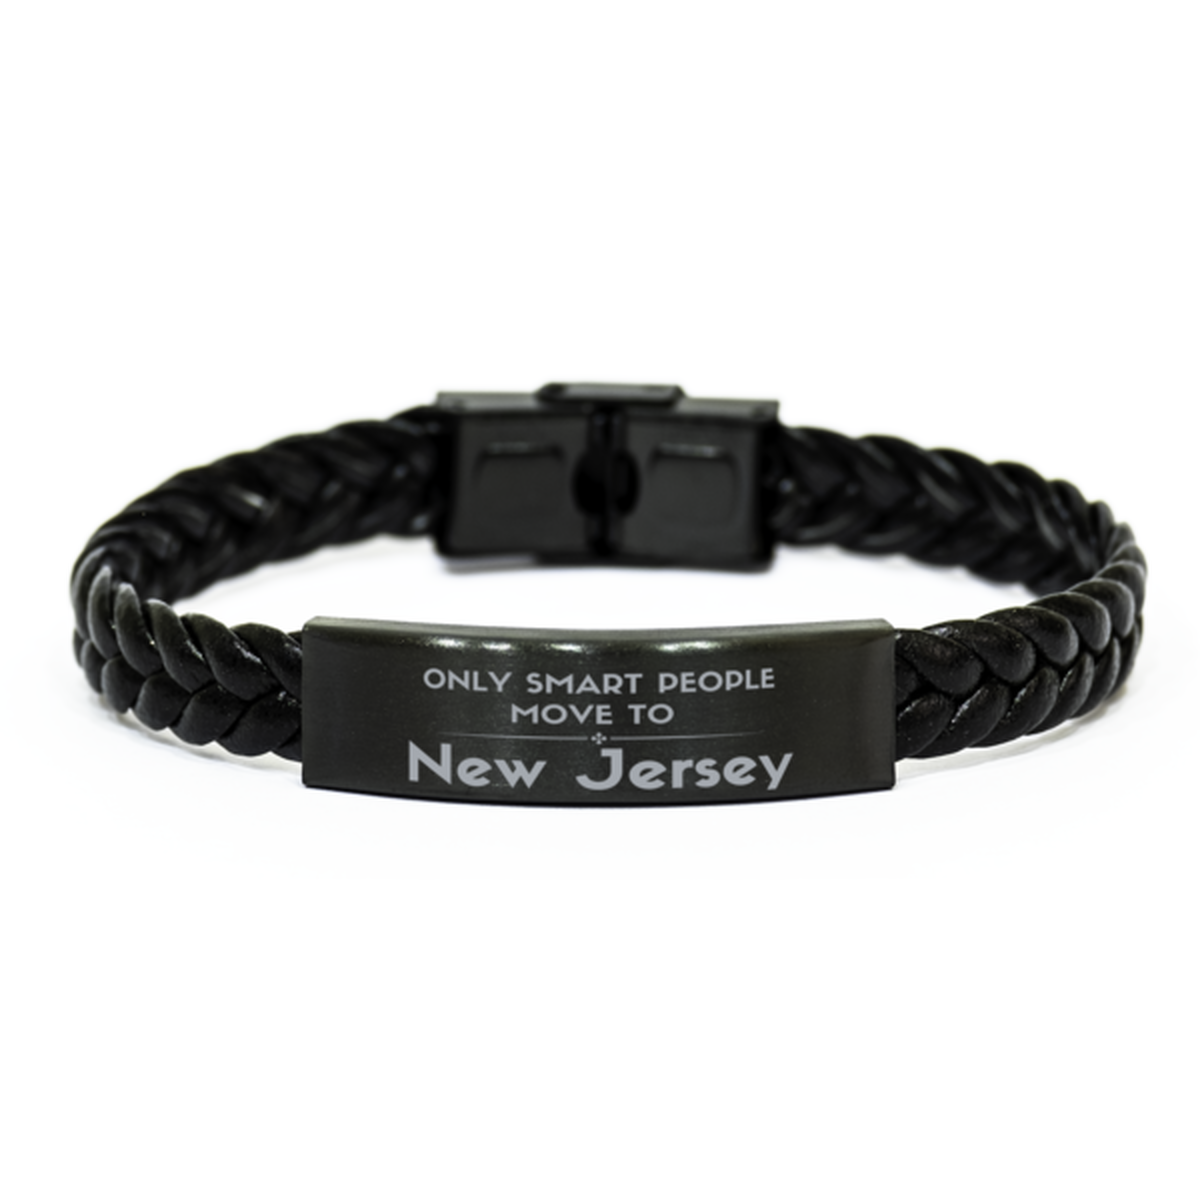 Only smart people move to New Jersey Braided Leather Bracelet, Gag Gifts For New Jersey, Move to New Jersey Gifts for Friends Coworker Funny Saying Quote